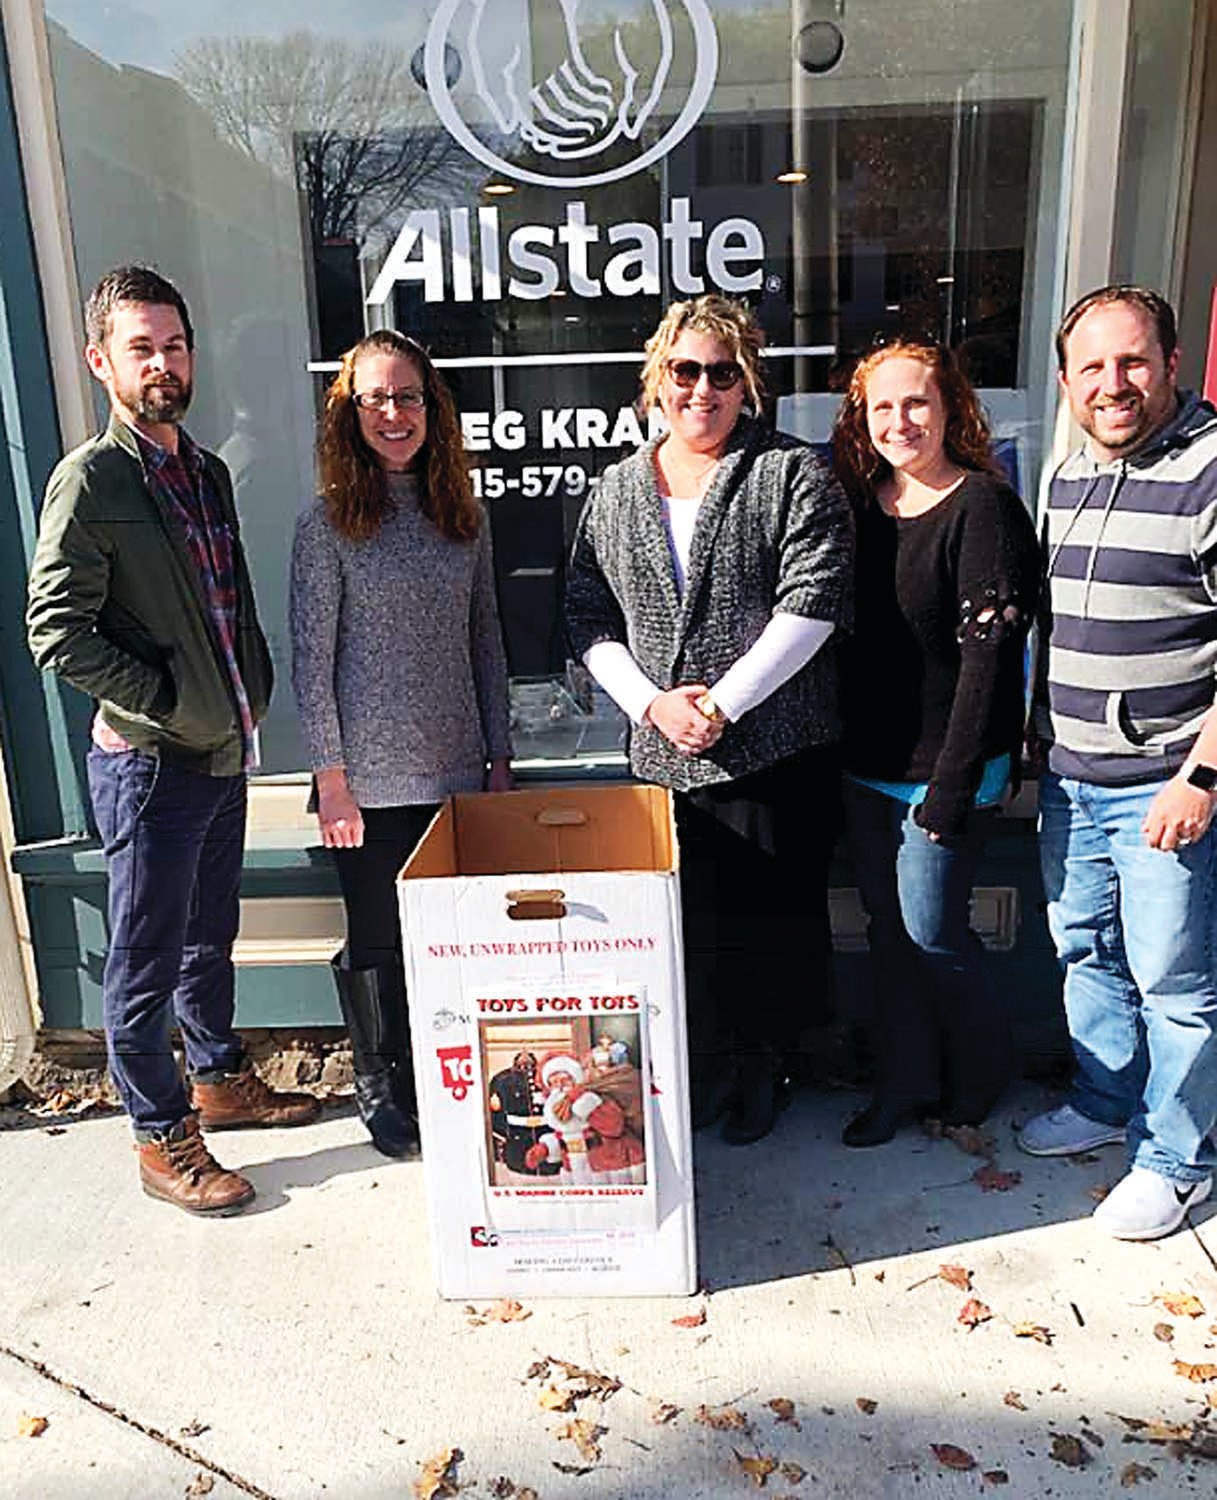 Greg Kramer and his team stand in front of his Allstate agency in Newtown with their Toys for Tots donation box.